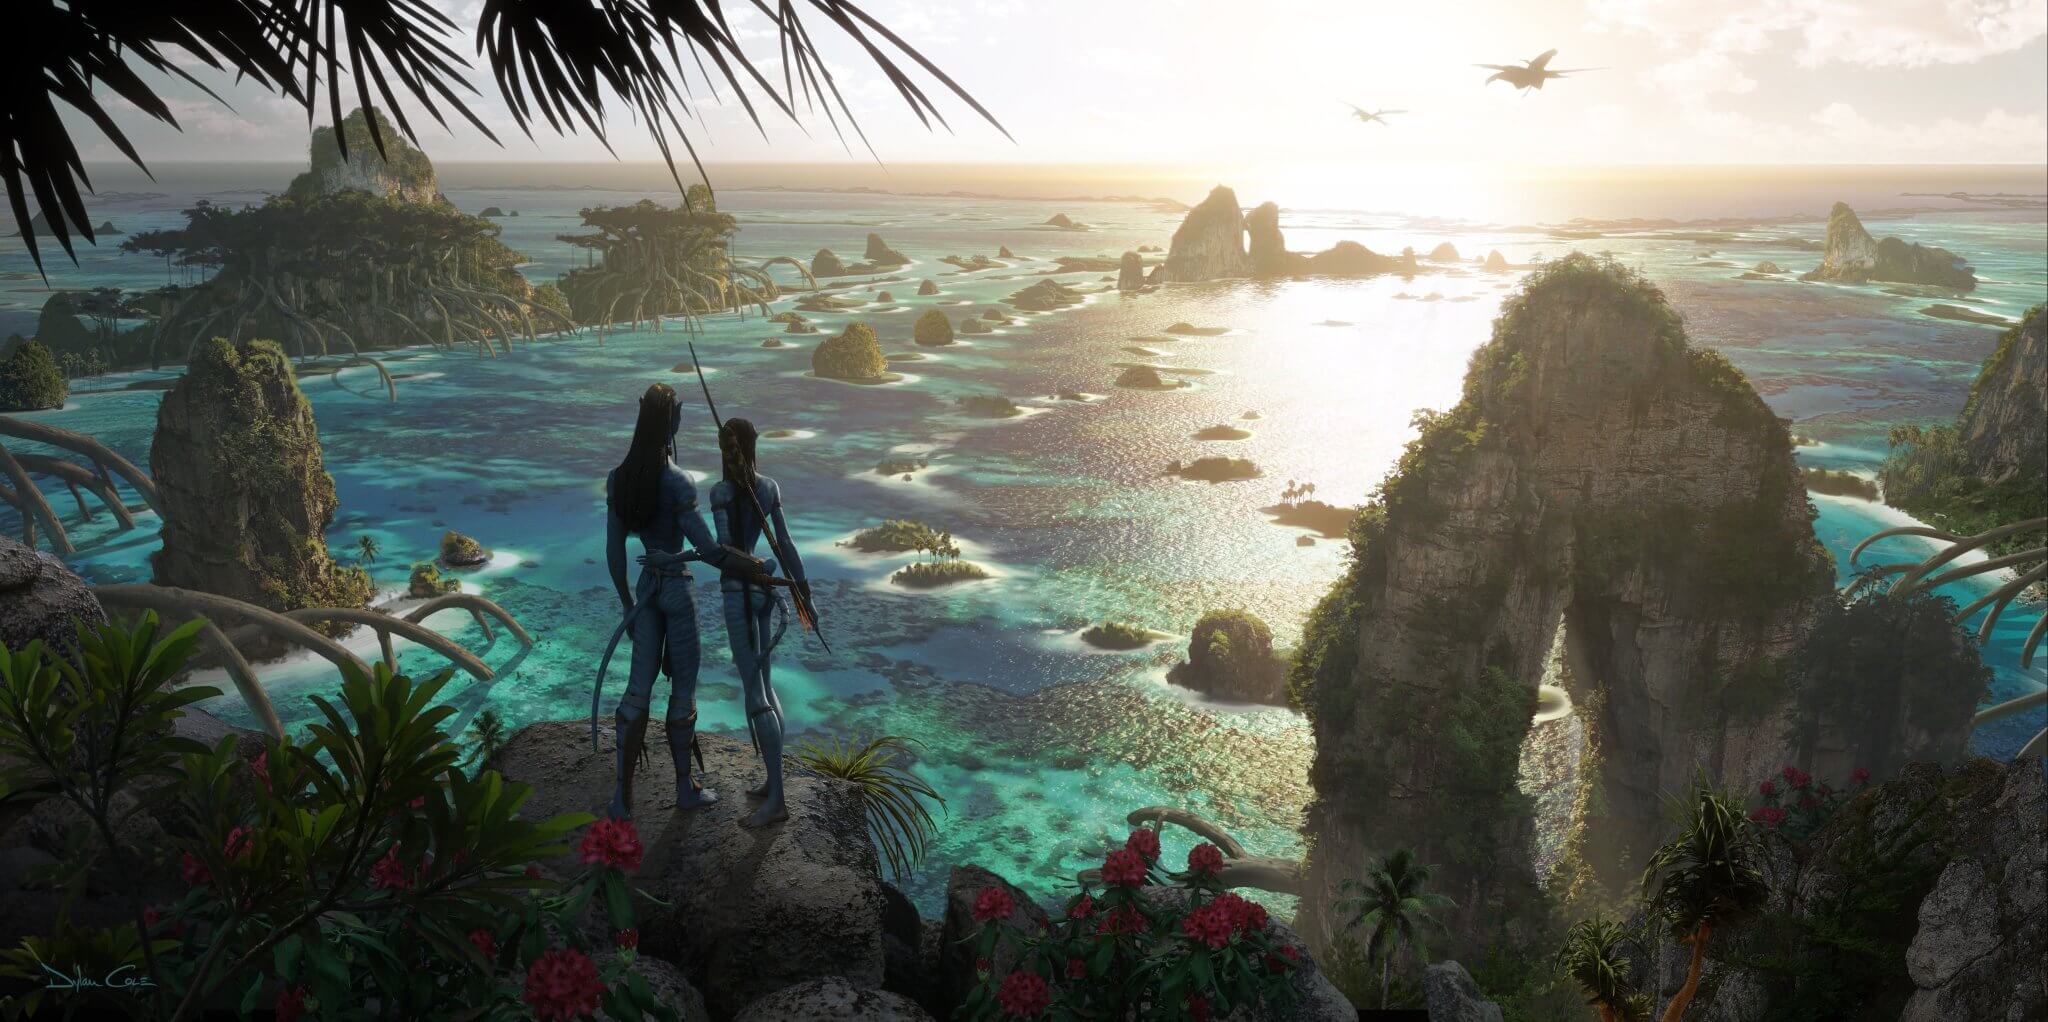 Beautiful New Concept Art For ‘Avatar’ Sequels Released